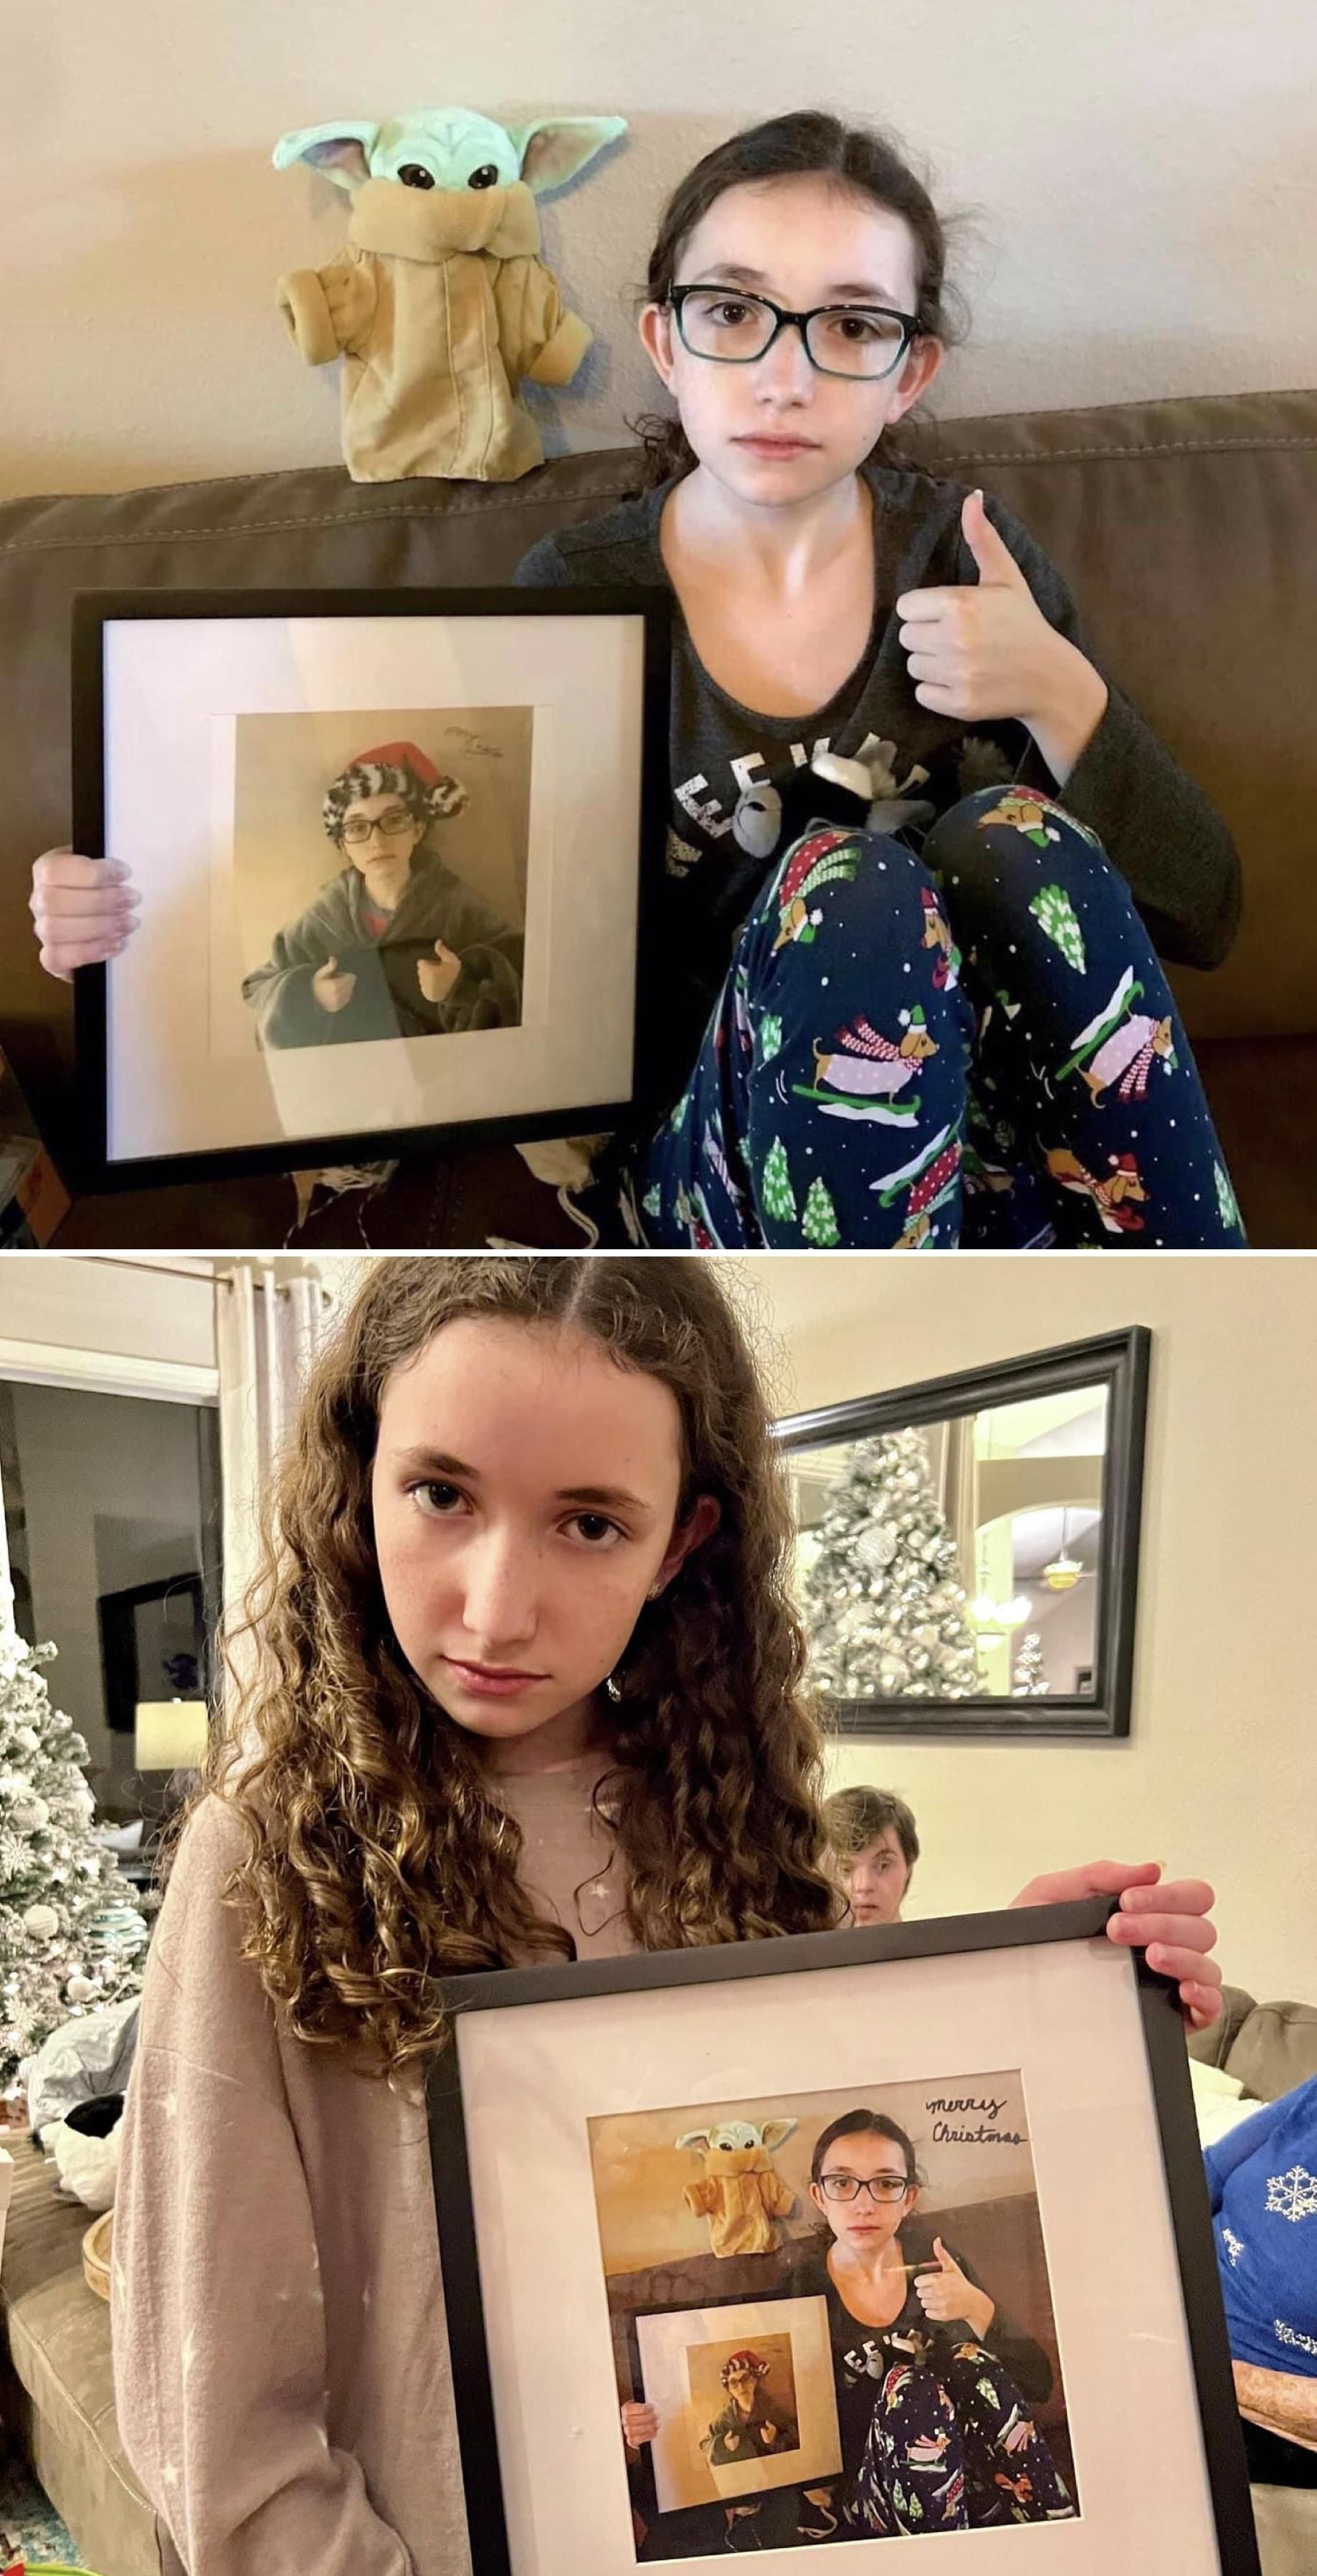 Last year for Christmas my daughter got my son a picture of herself. This year she got him a picture of herself holding the picture she got him last year.